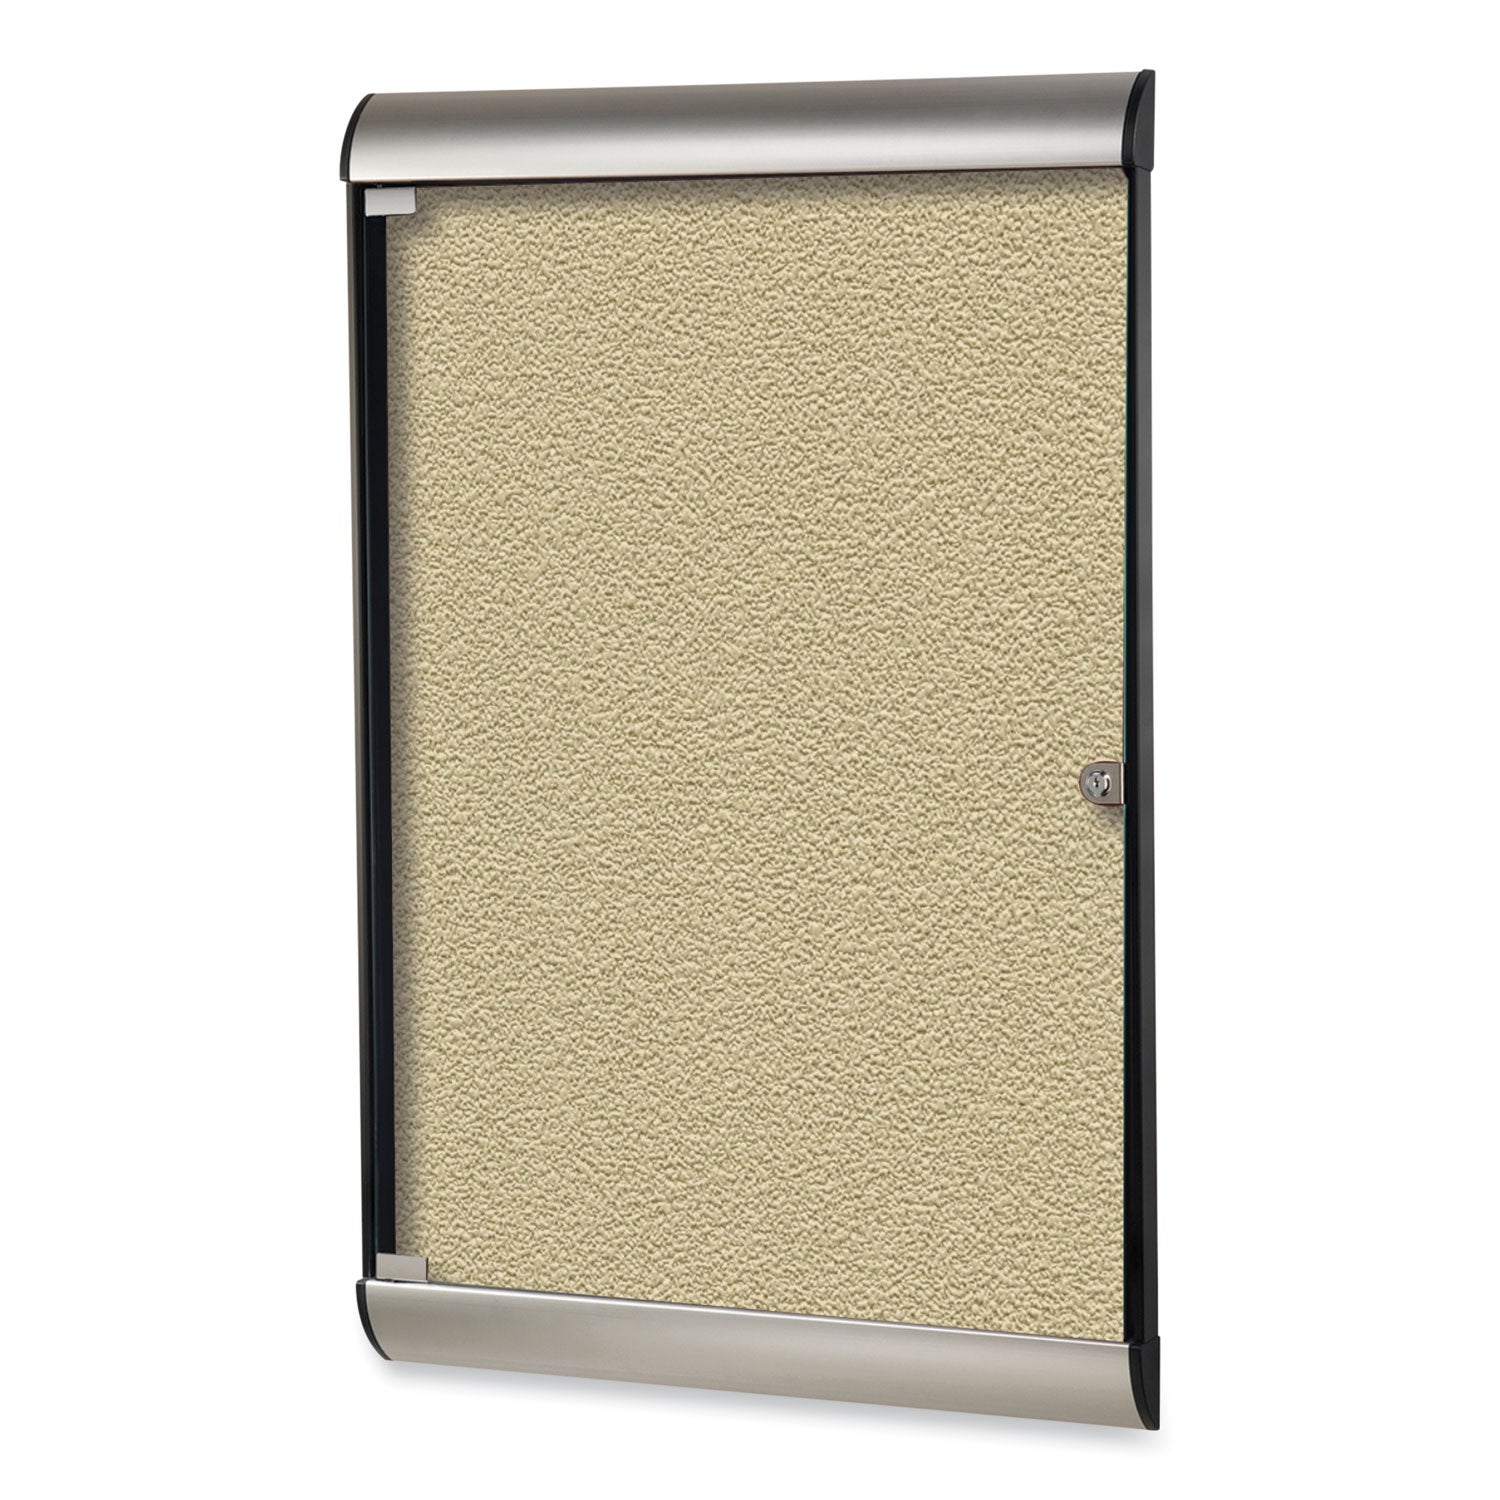 silhouette-1-door-enclosed-caramel-vinyl-bulletin-board-with-satin-black-frame-2775-x-4213-ships-in-7-10-business-days_ghesilh20410 - 1